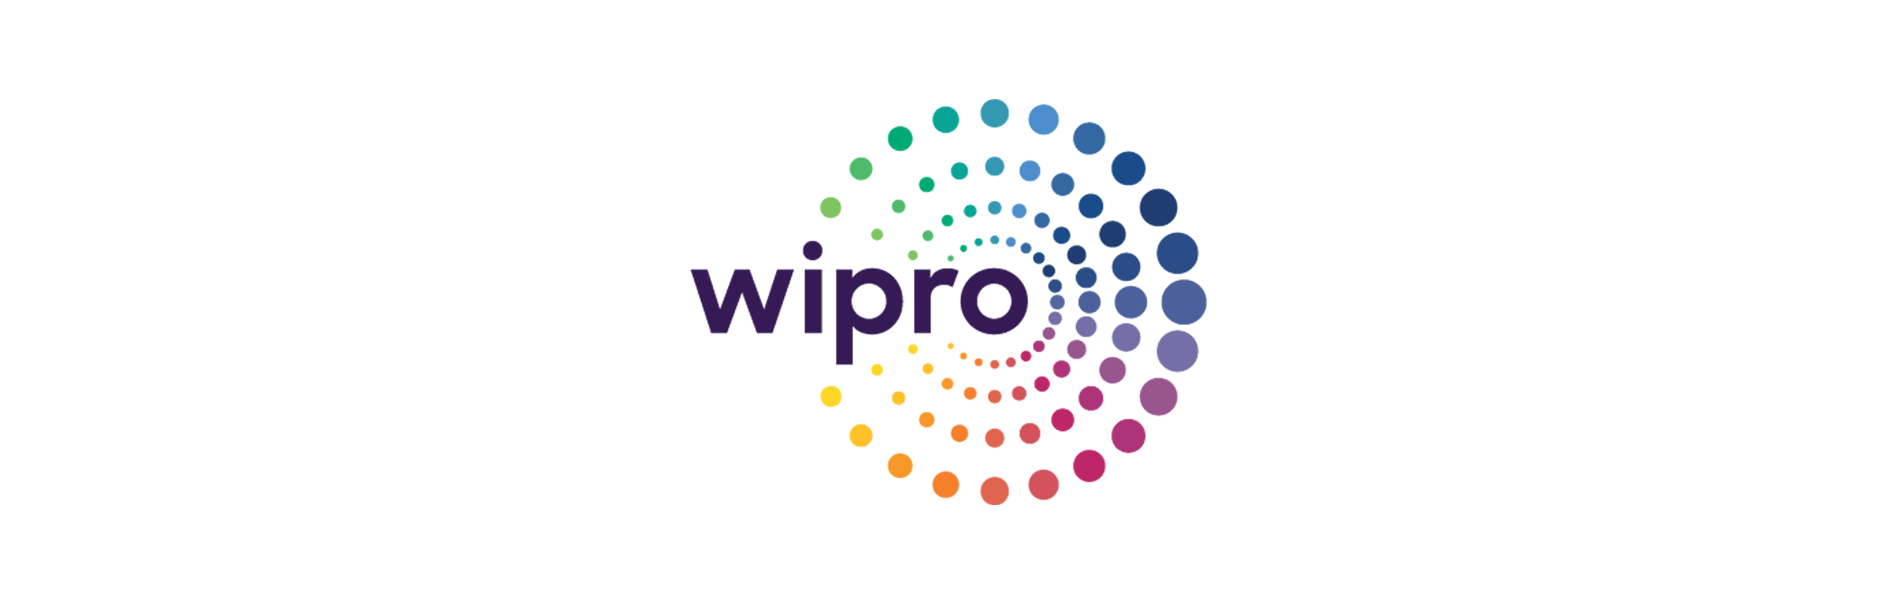 Cloud Native Transformation Through an Industrialized As a Service Model  - Wipro